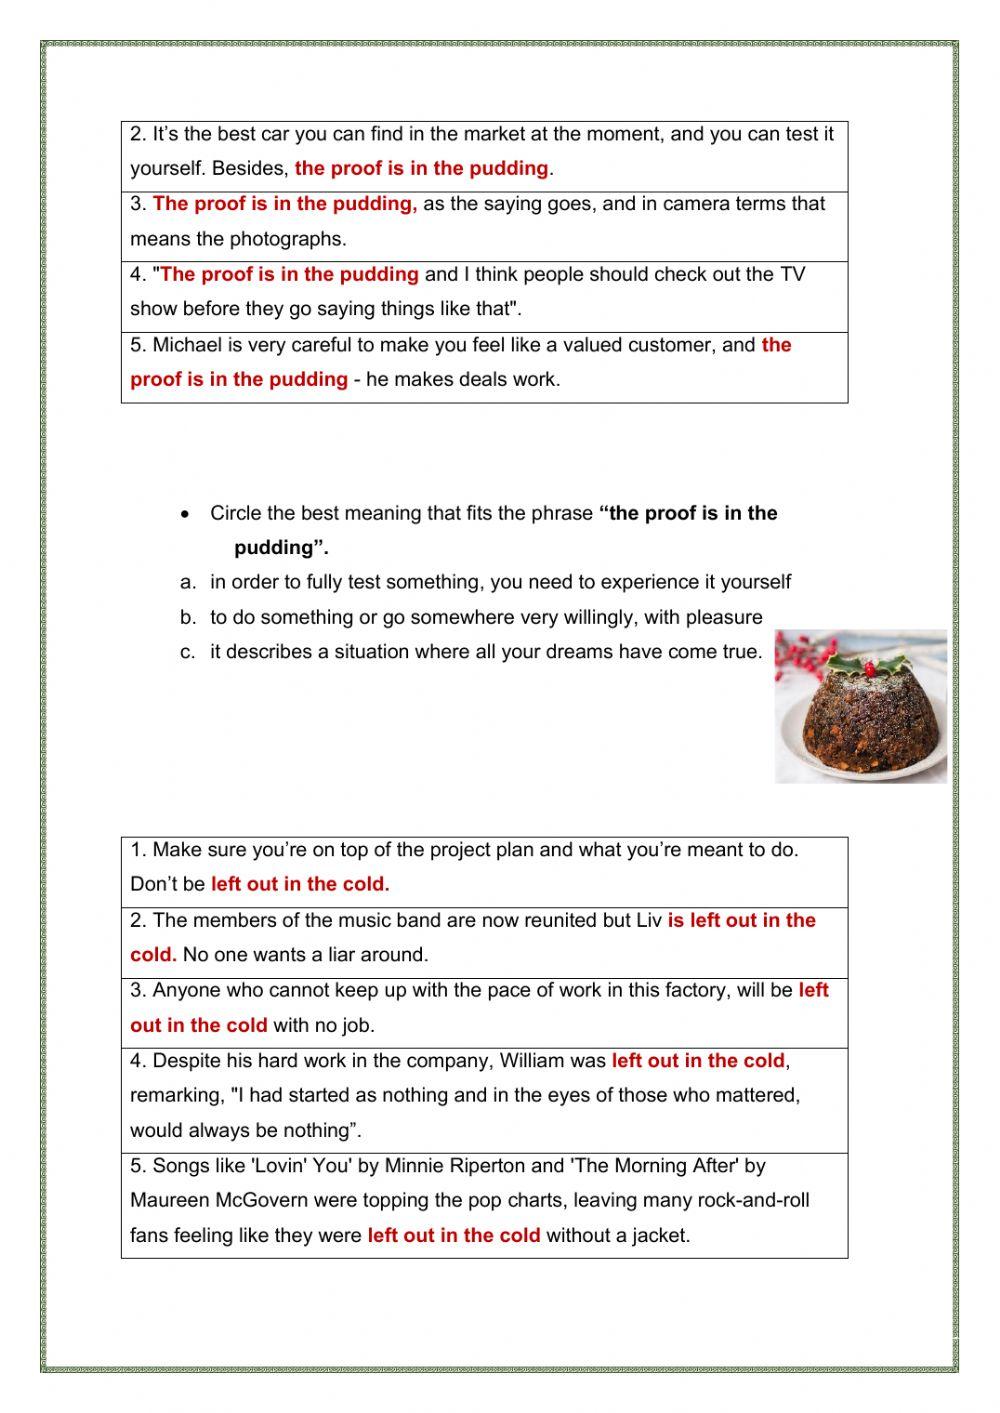 Idioms related to Christmas and the New Year Eve